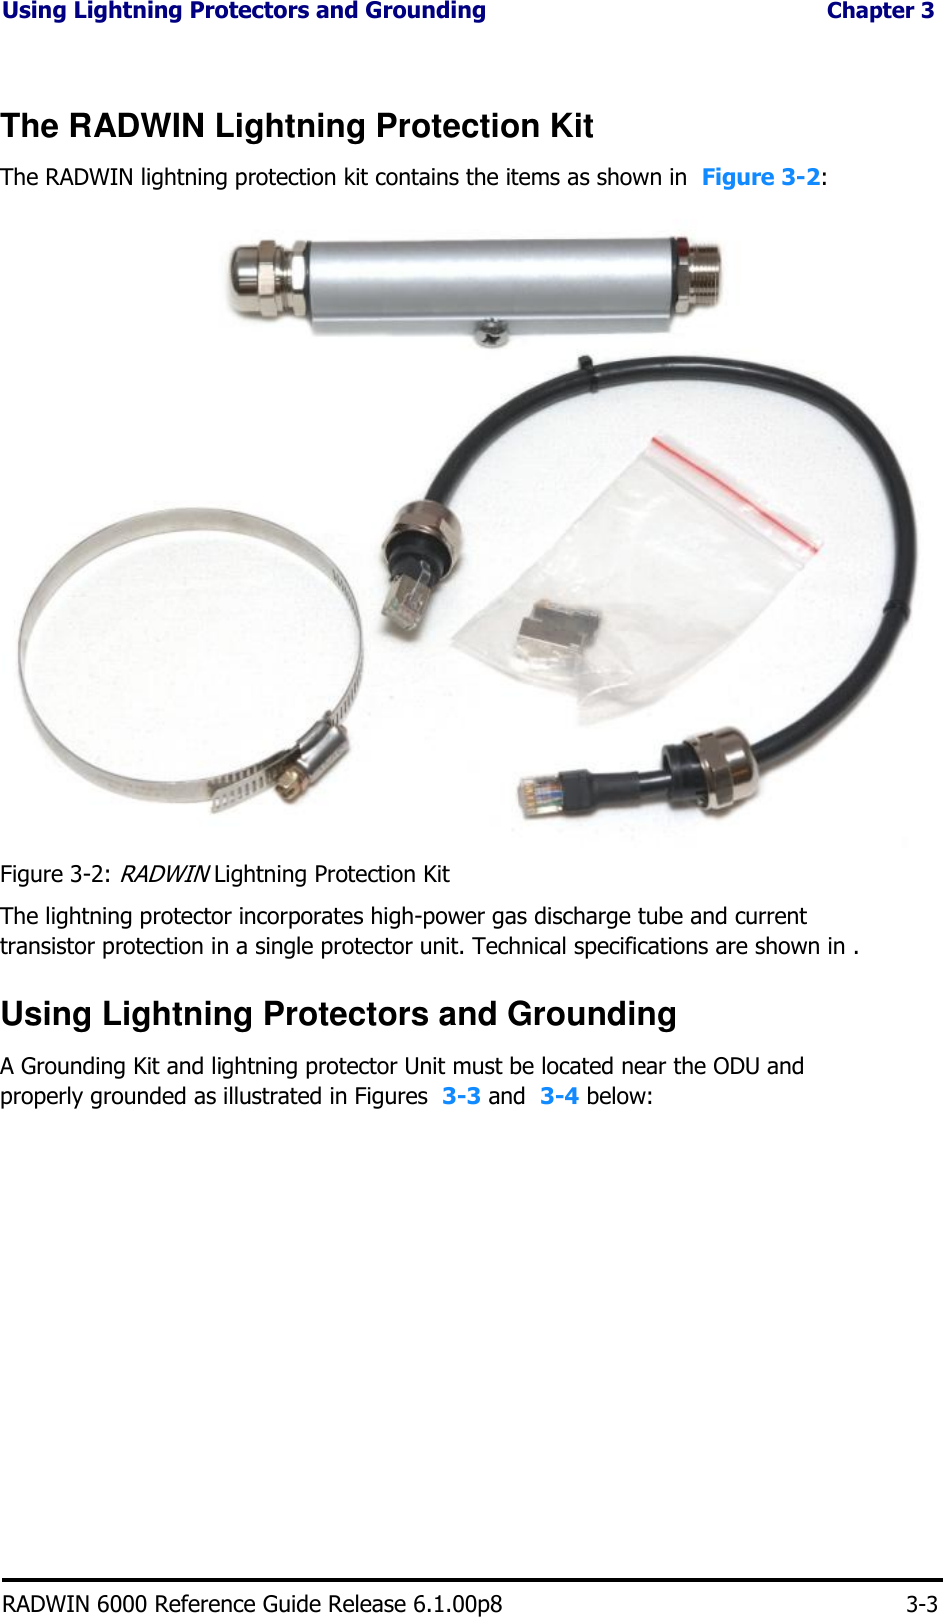 Using Lightning Protectors and Grounding Chapter 3    The RADWIN Lightning Protection Kit  The RADWIN lightning protection kit contains the items as shown in  Figure 3-2:                                 Figure 3-2: RADWIN Lightning Protection Kit  The lightning protector incorporates high-power gas discharge tube and current transistor protection in a single protector unit. Technical specifications are shown in .  Using Lightning Protectors and Grounding  A Grounding Kit and lightning protector Unit must be located near the ODU and properly grounded as illustrated in Figures  3-3 and  3-4 below:                       RADWIN 6000 Reference Guide Release 6.1.00p8 3-3